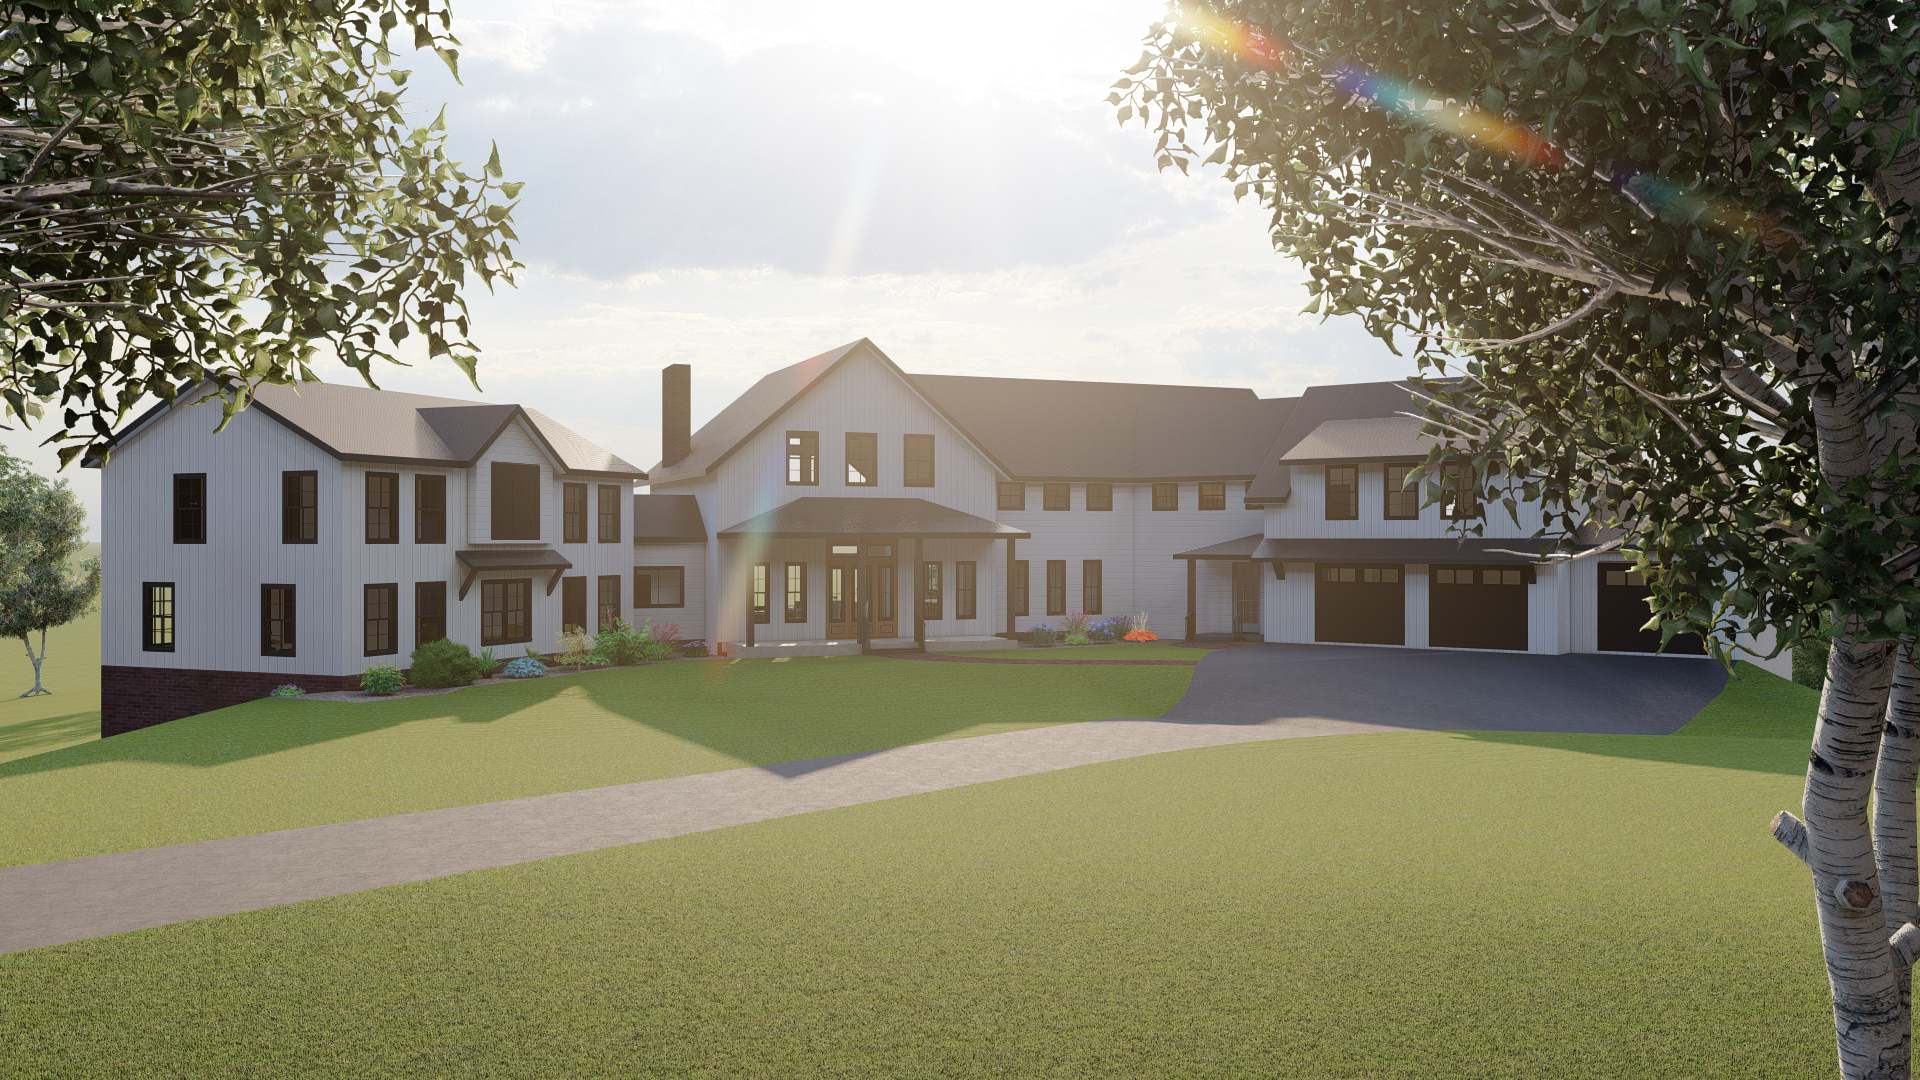 An addition to an existing 20 year old colonial. The owners decided they wanted to go with a nice bright modern farmhouse feel with huge windows and tons of natural light.